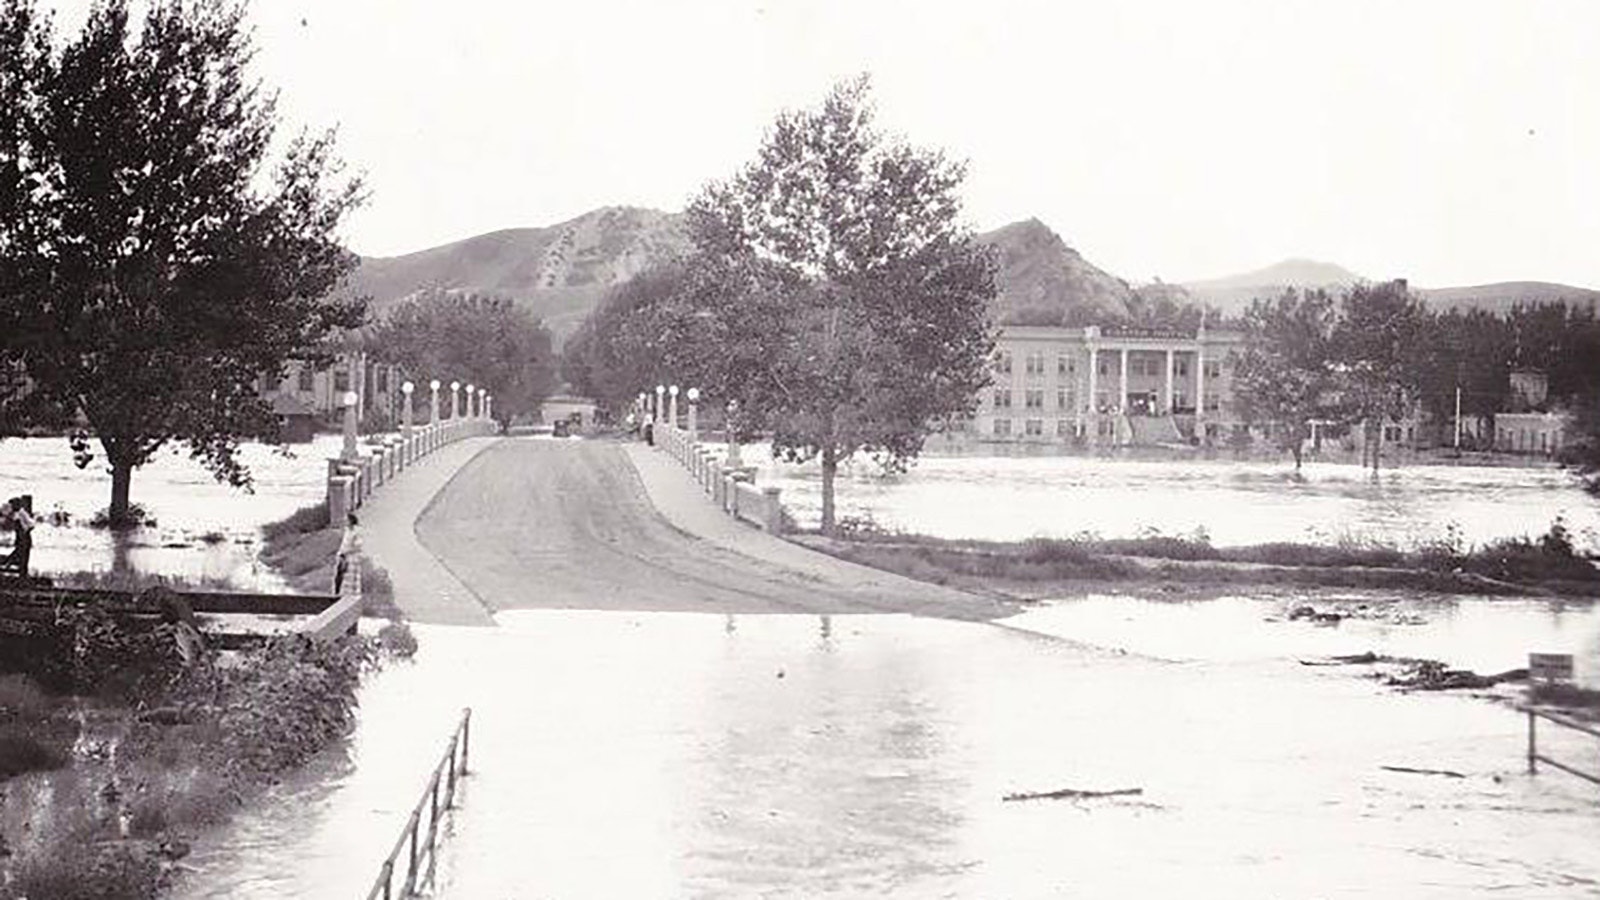 Navigating the streets of Thermopolis on July 24, 1923, became a real gamble as water from torrential rains upstream arrived in the city.